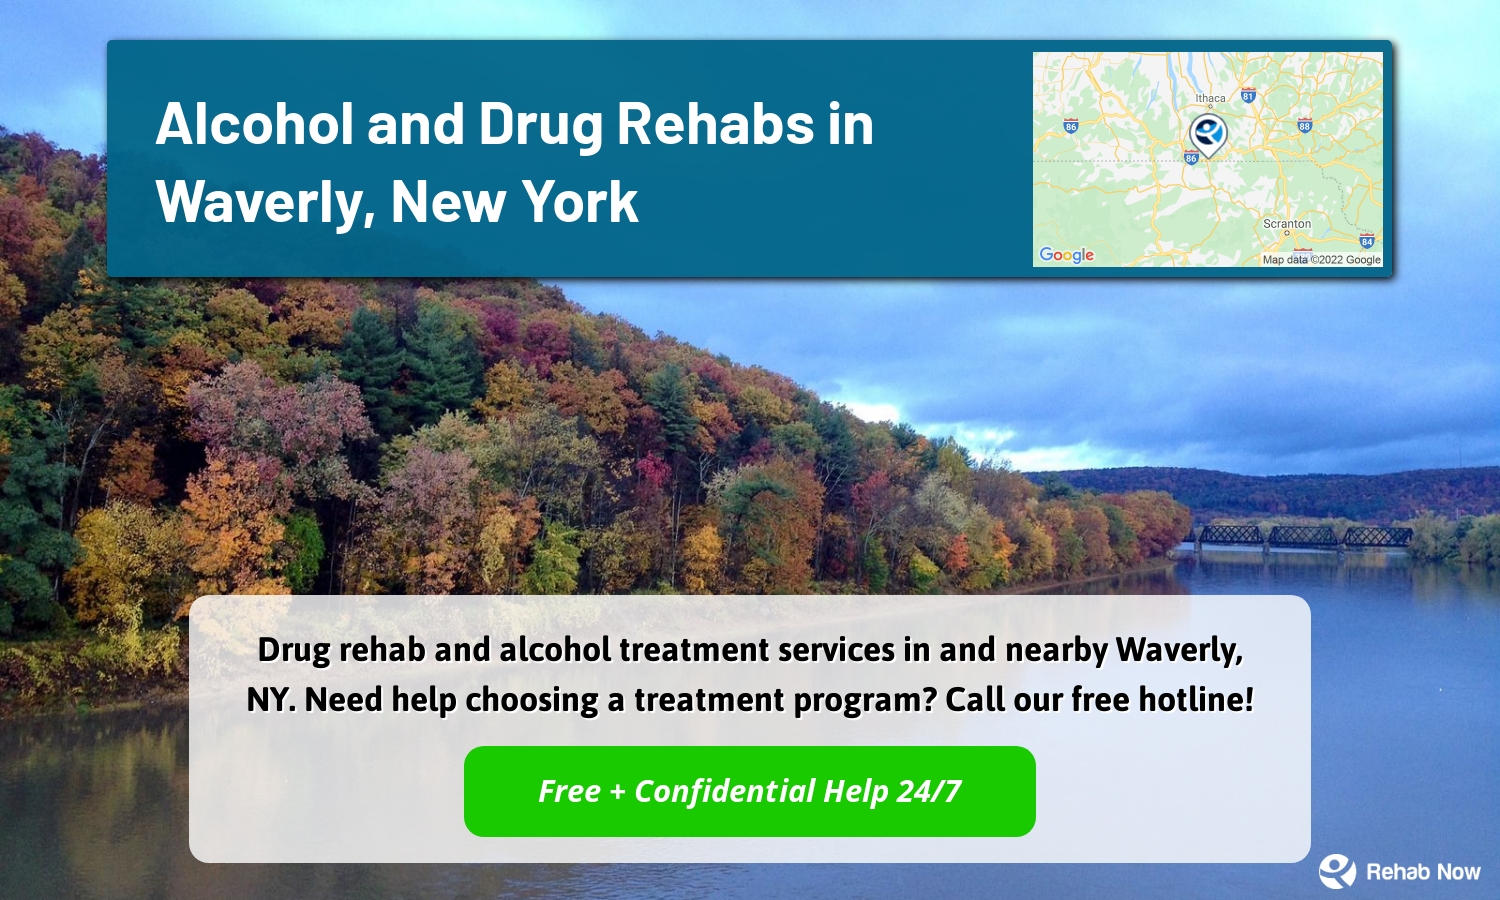 Drug rehab and alcohol treatment services in and nearby Waverly, NY. Need help choosing a treatment program? Call our free hotline!